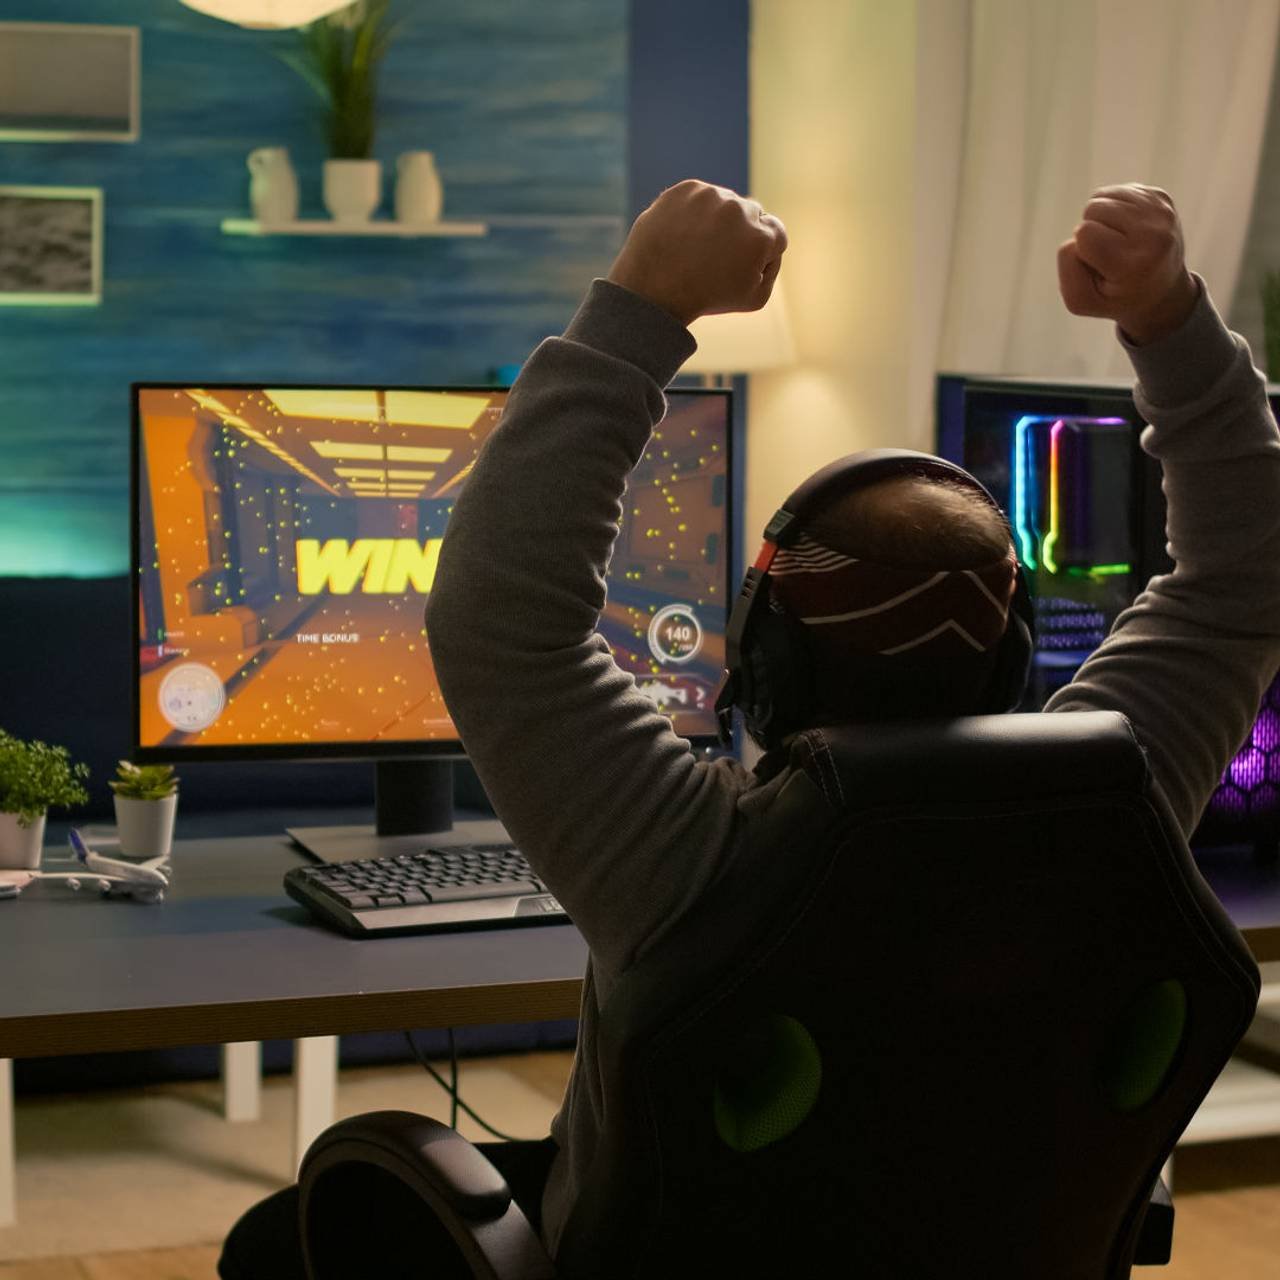 videogamer player raising hands after winning first person shooter competition wearing hradphones professional pro gamer playing online video games with new graphics powerful computer (1)